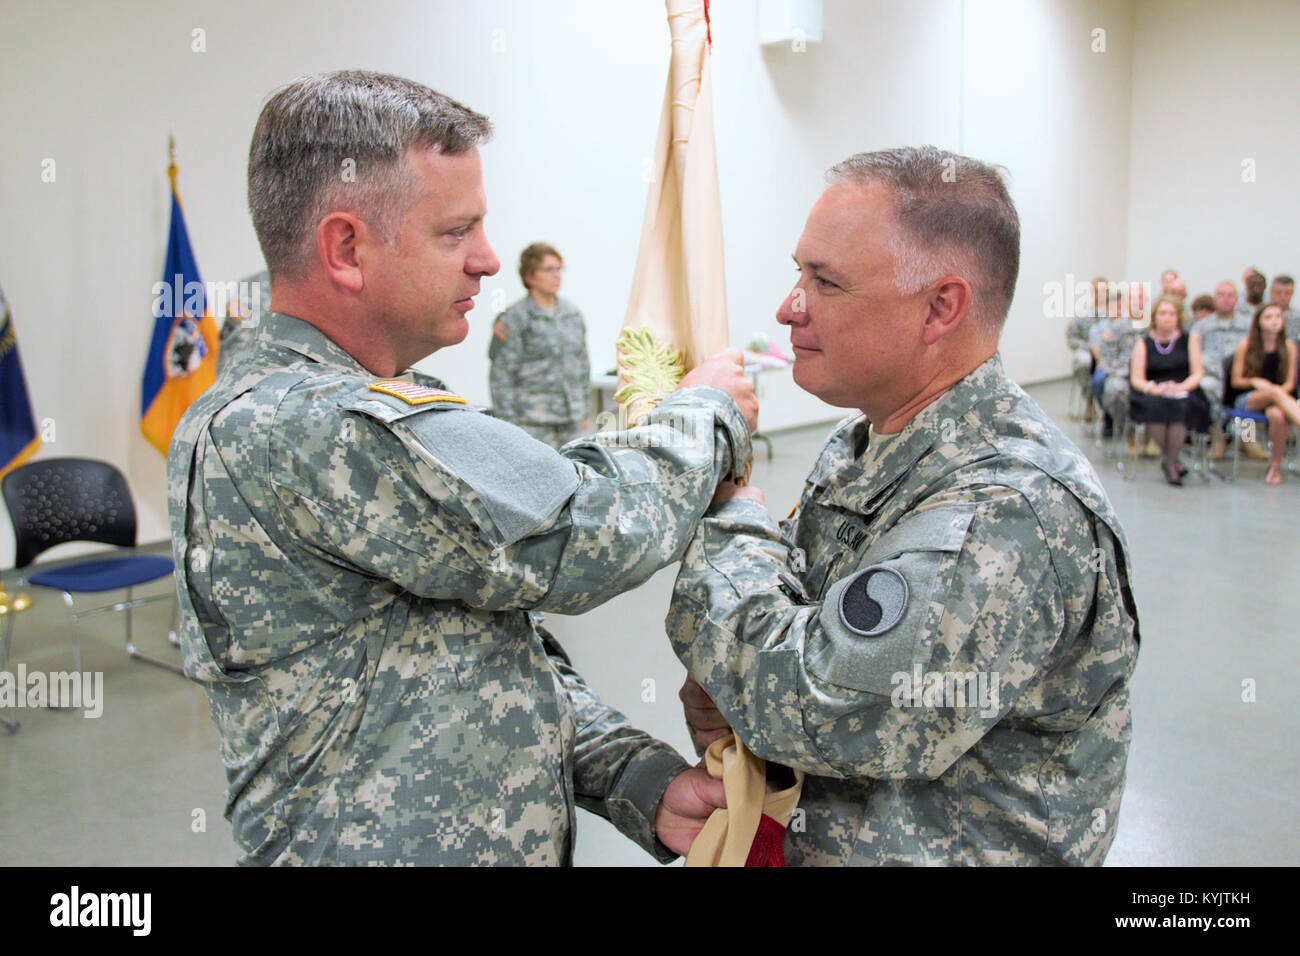 Lt Col. (P) Michael Stephens (left), Commander of the 63rd Theater Aviation Brigade passes the guidon to Lt. Col. Mark A. Brozak. Lt. Col. Brozak is the new  commander of the 1204th  Aviation Support Battalion in Burlington, Ky. Sep. 28, 2014. (U.S. Army National Guard photo by 2nd Lt. Michael Reinersman) Stock Photo